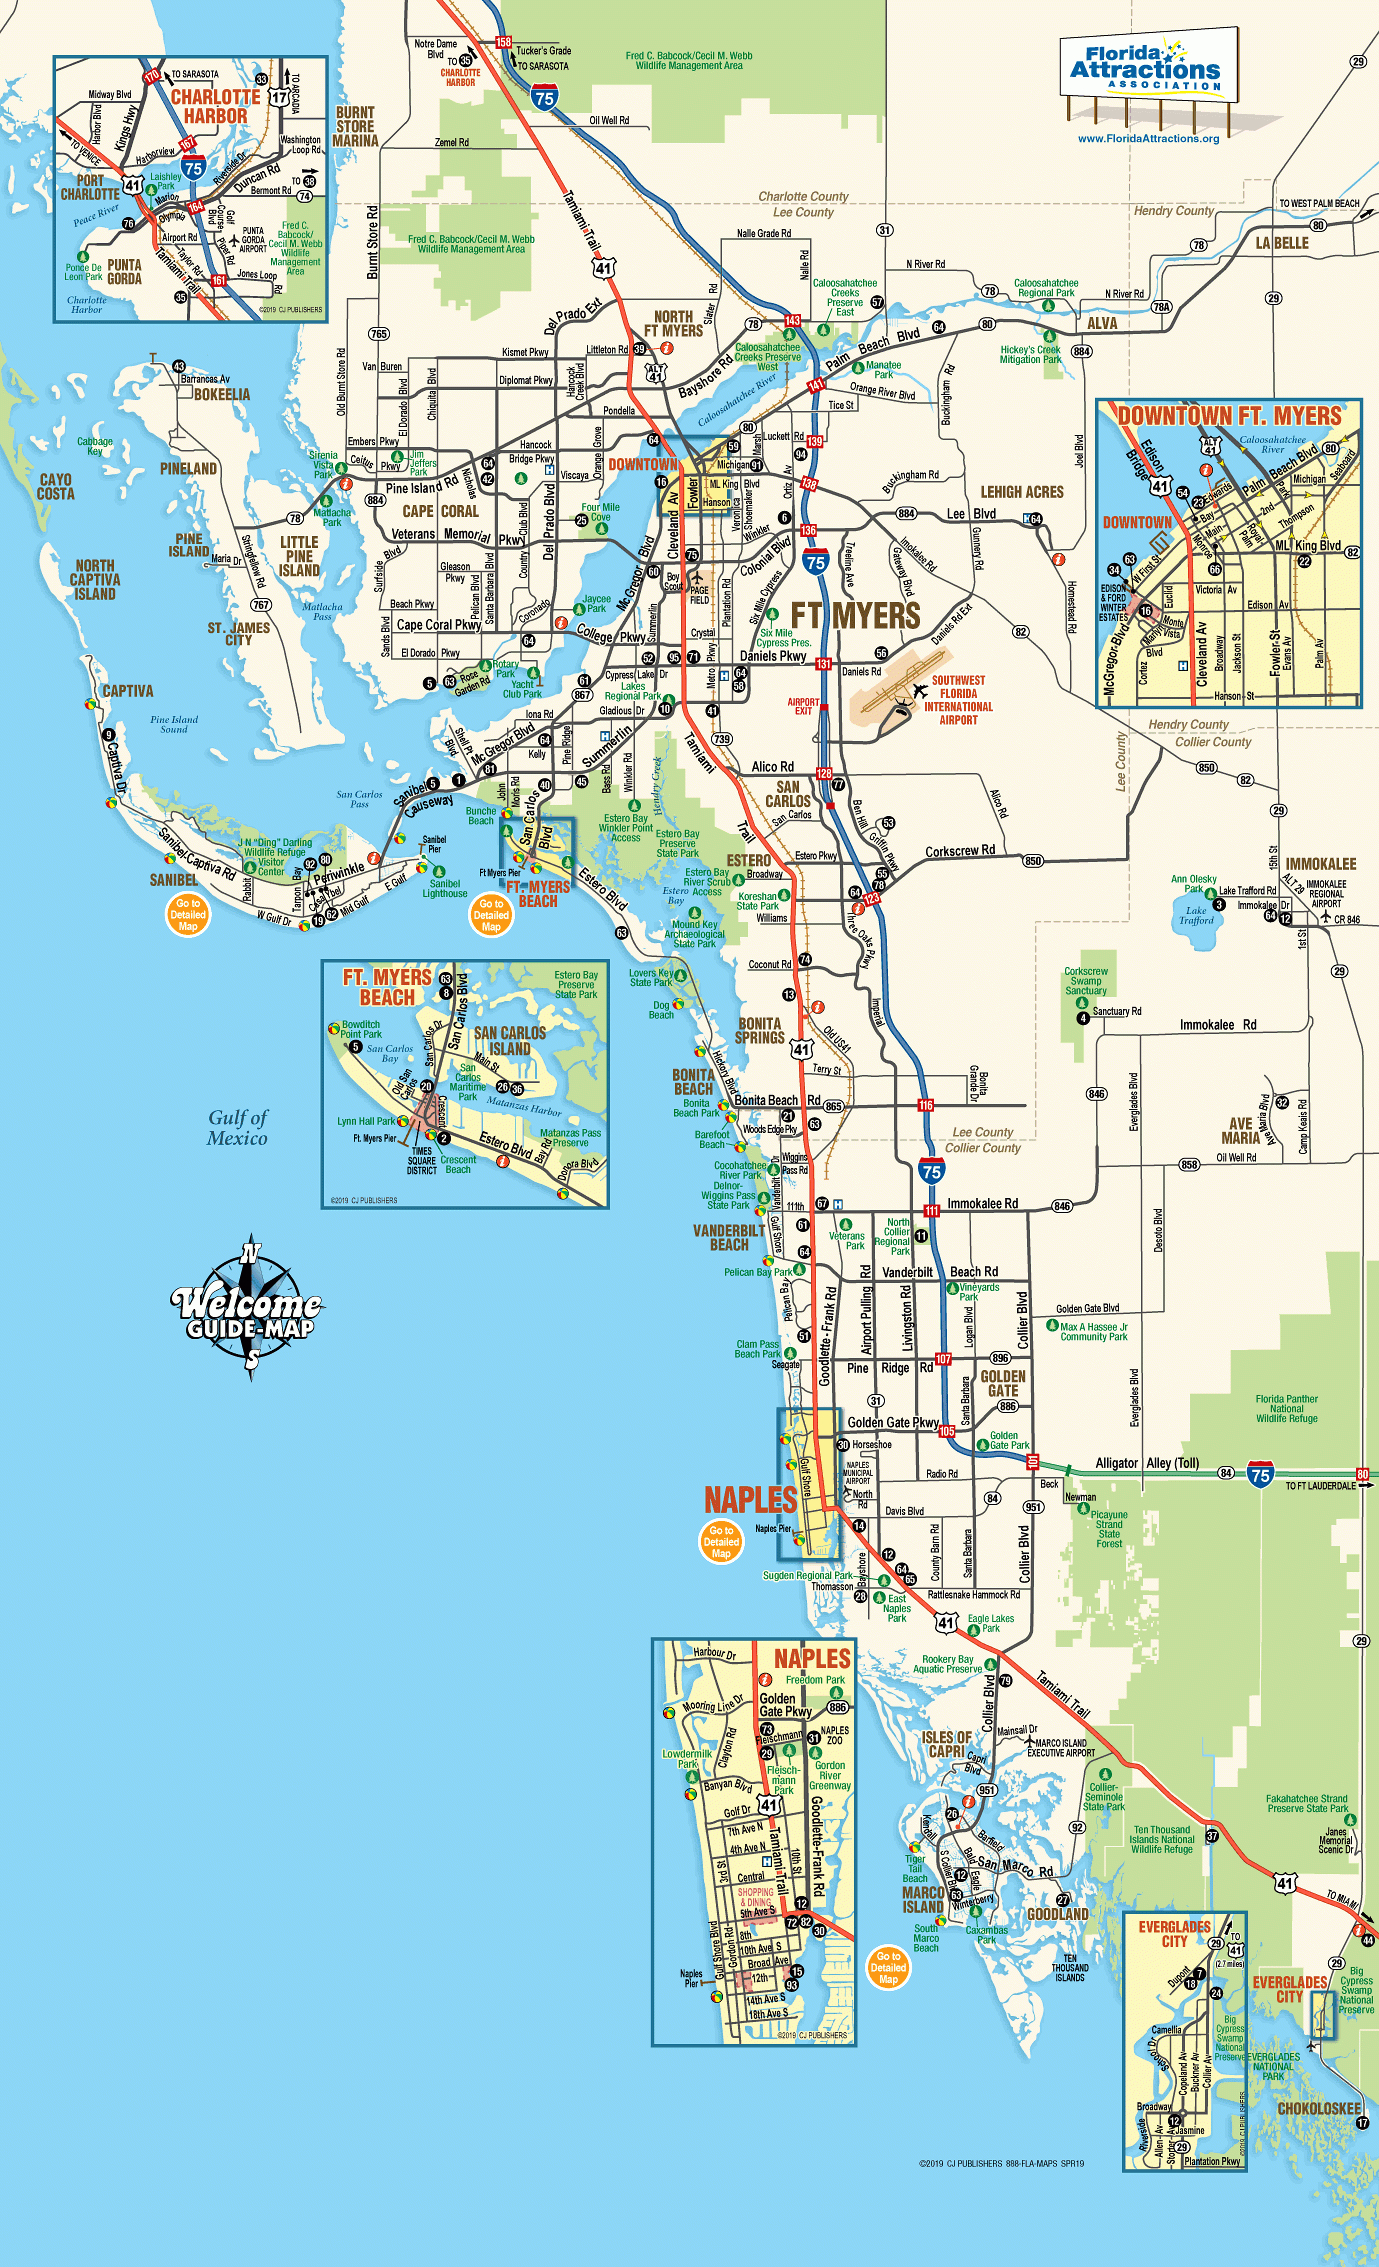 Map Of Southwest Florida - Welcome Guide-Map To Fort Myers &amp;amp; Naples - Pelican Bay Florida Map